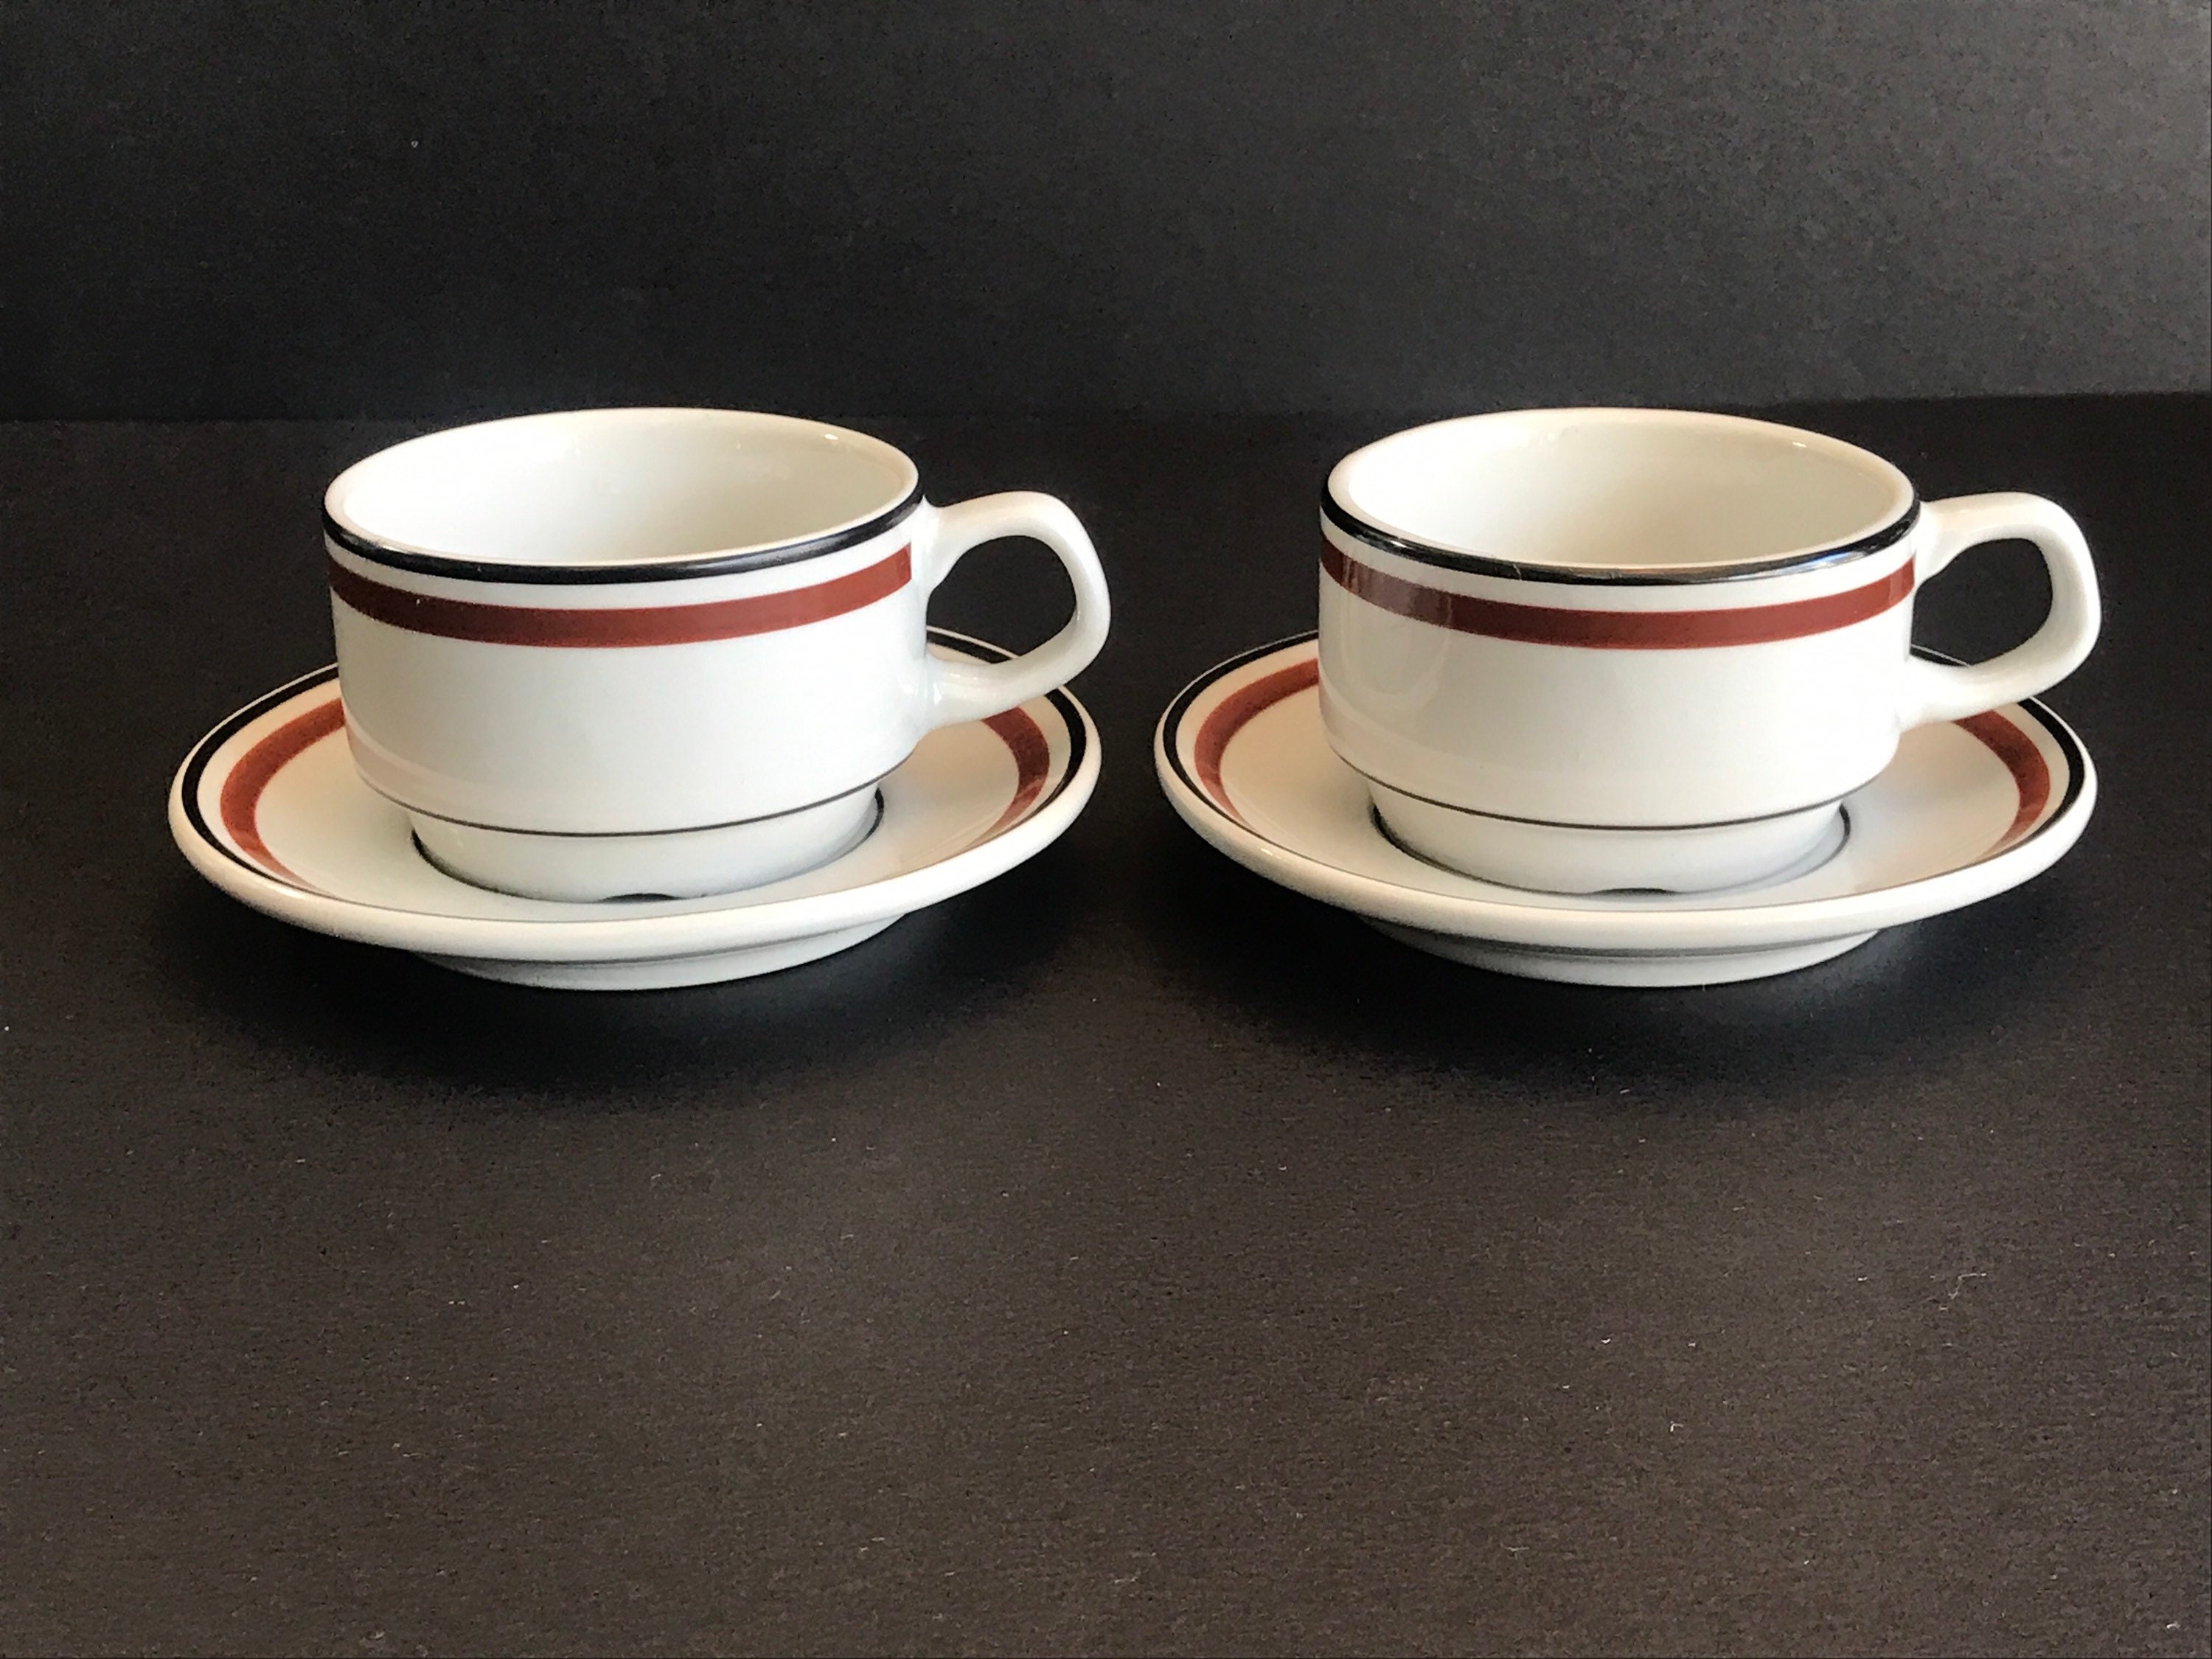 LE TAUCI 8 oz Cappuccino Cups with Saucers，Ceramic Large  Coffee Cup for Au Lait, Double shot, Latte, Cafe Mocha, Tea - Set of 4,  White: Cup & Saucer Sets